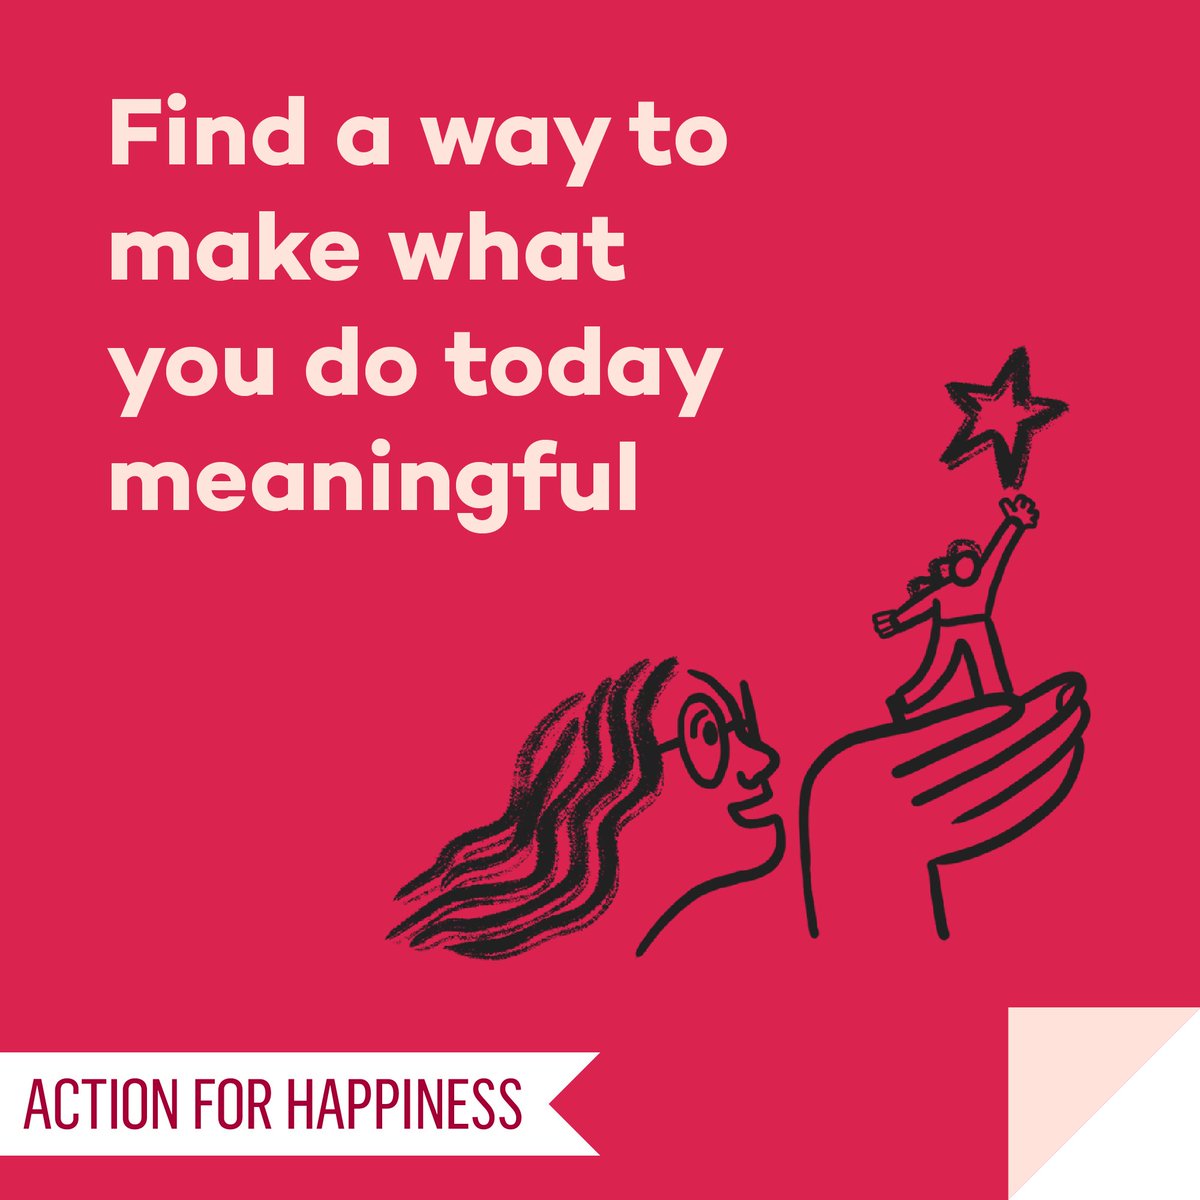 Meaningful May - Day 17: Find a way to make what you do today meaningful actionforhappiness.org/meaningful-may #MeaningfulMay